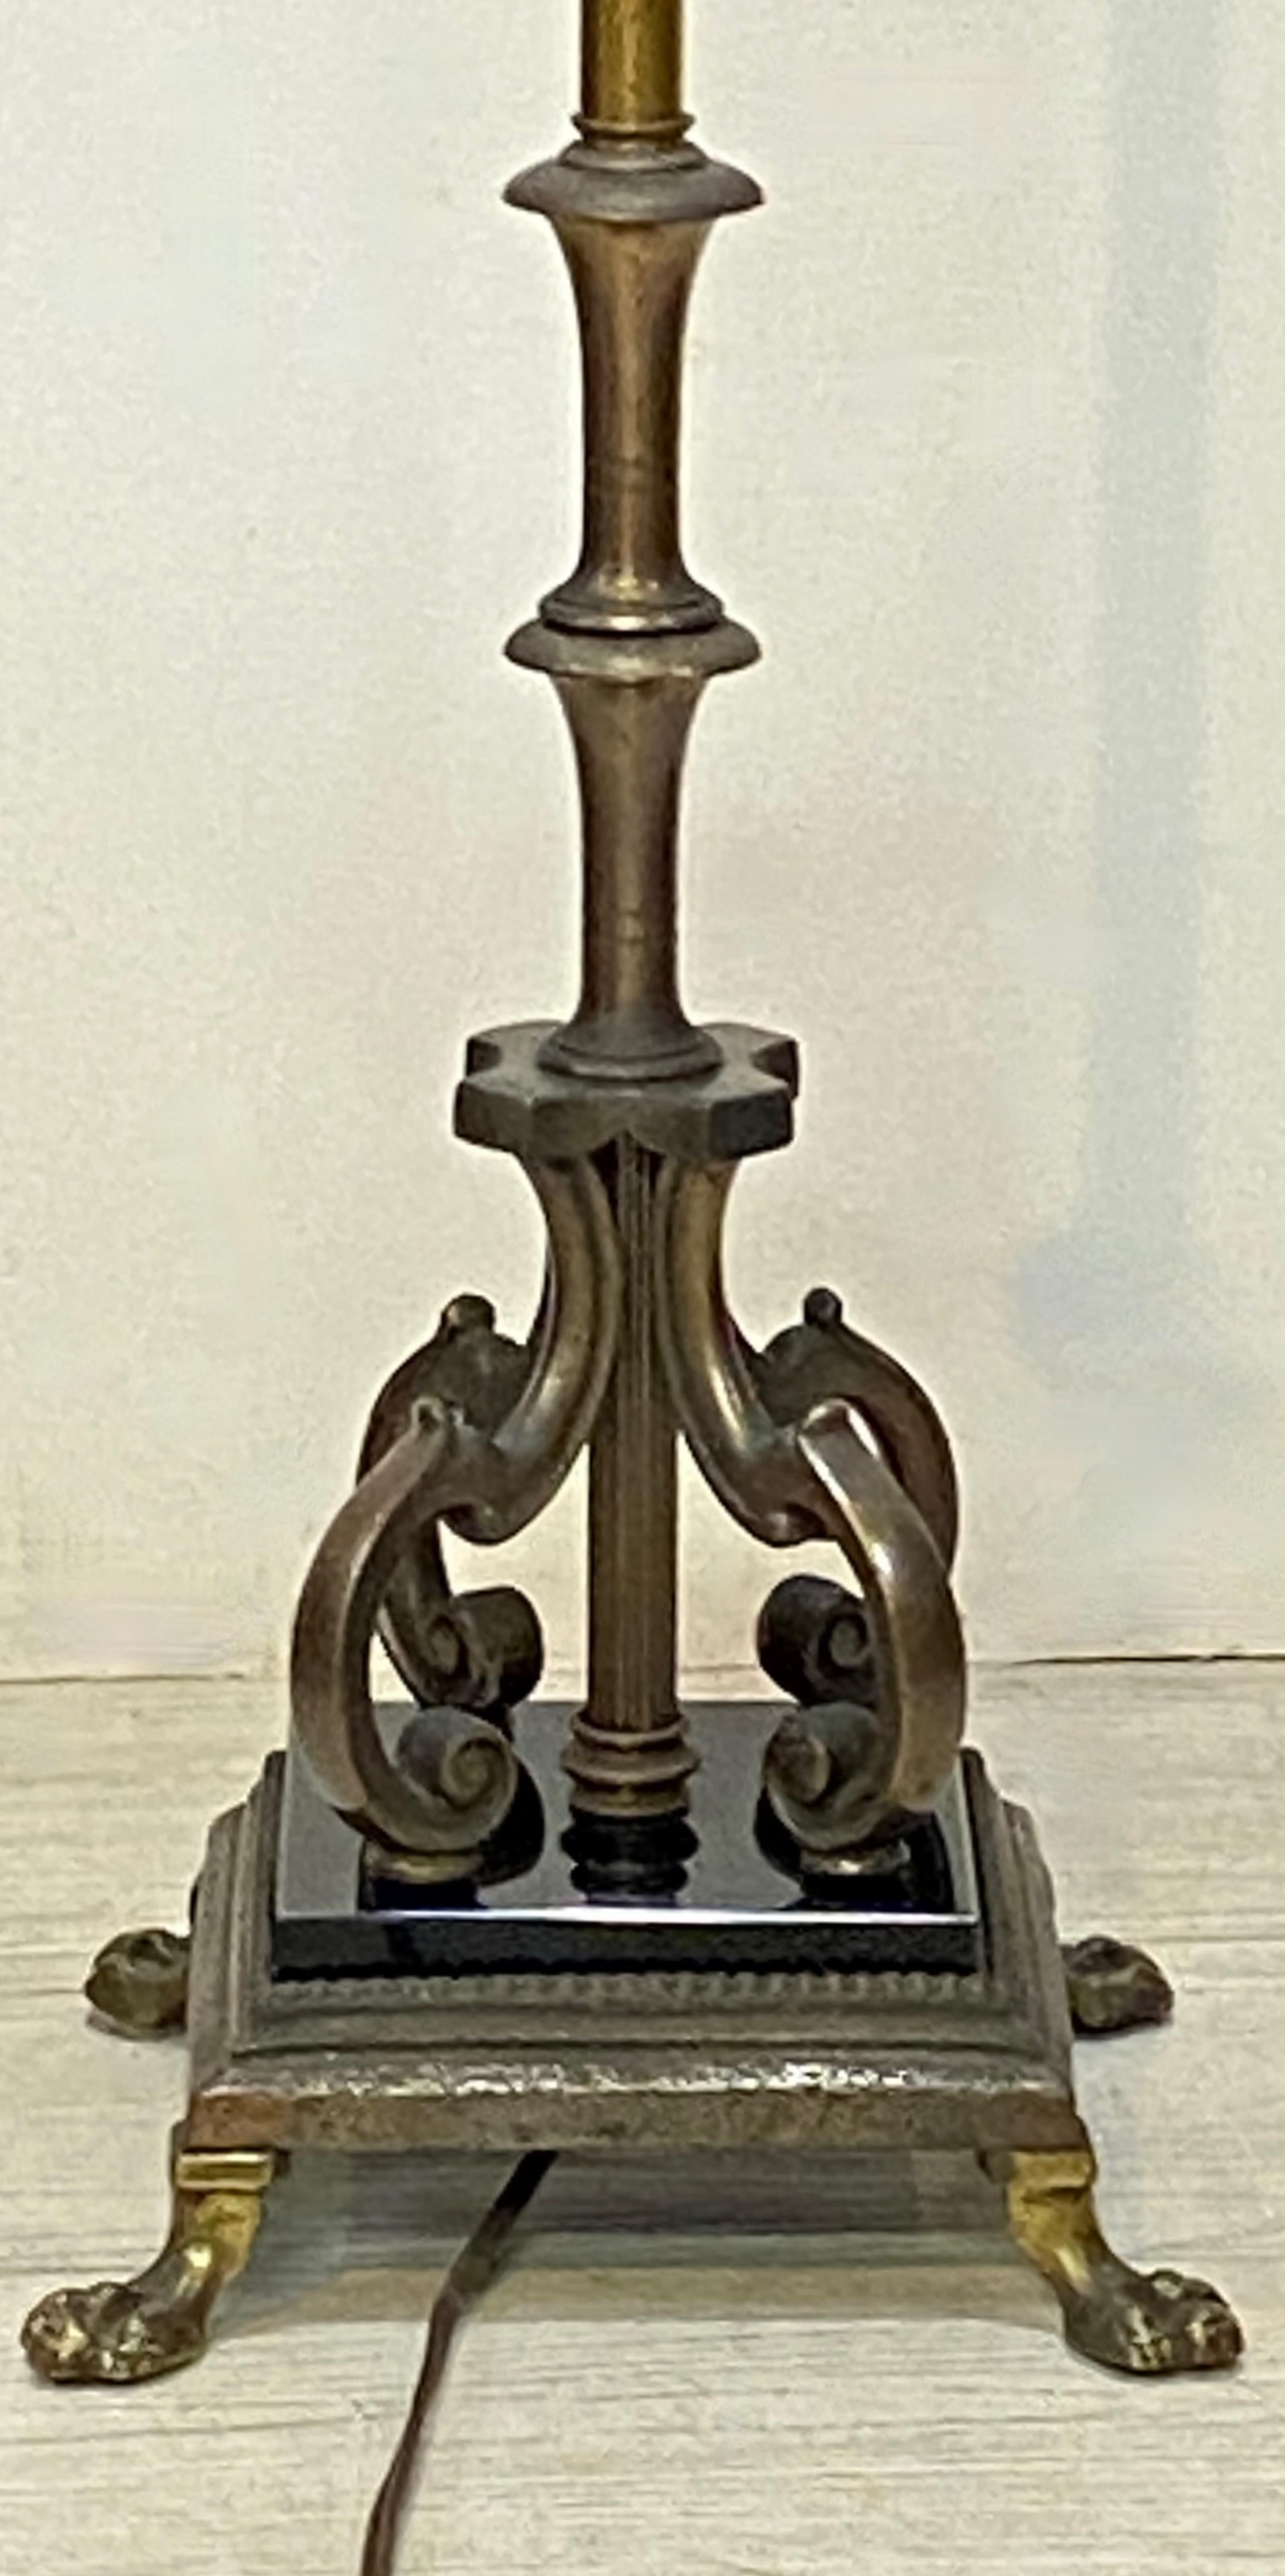 American Art Deco Period Floor Lamp with Durand Art Glass Shade, 1920's For Sale 1